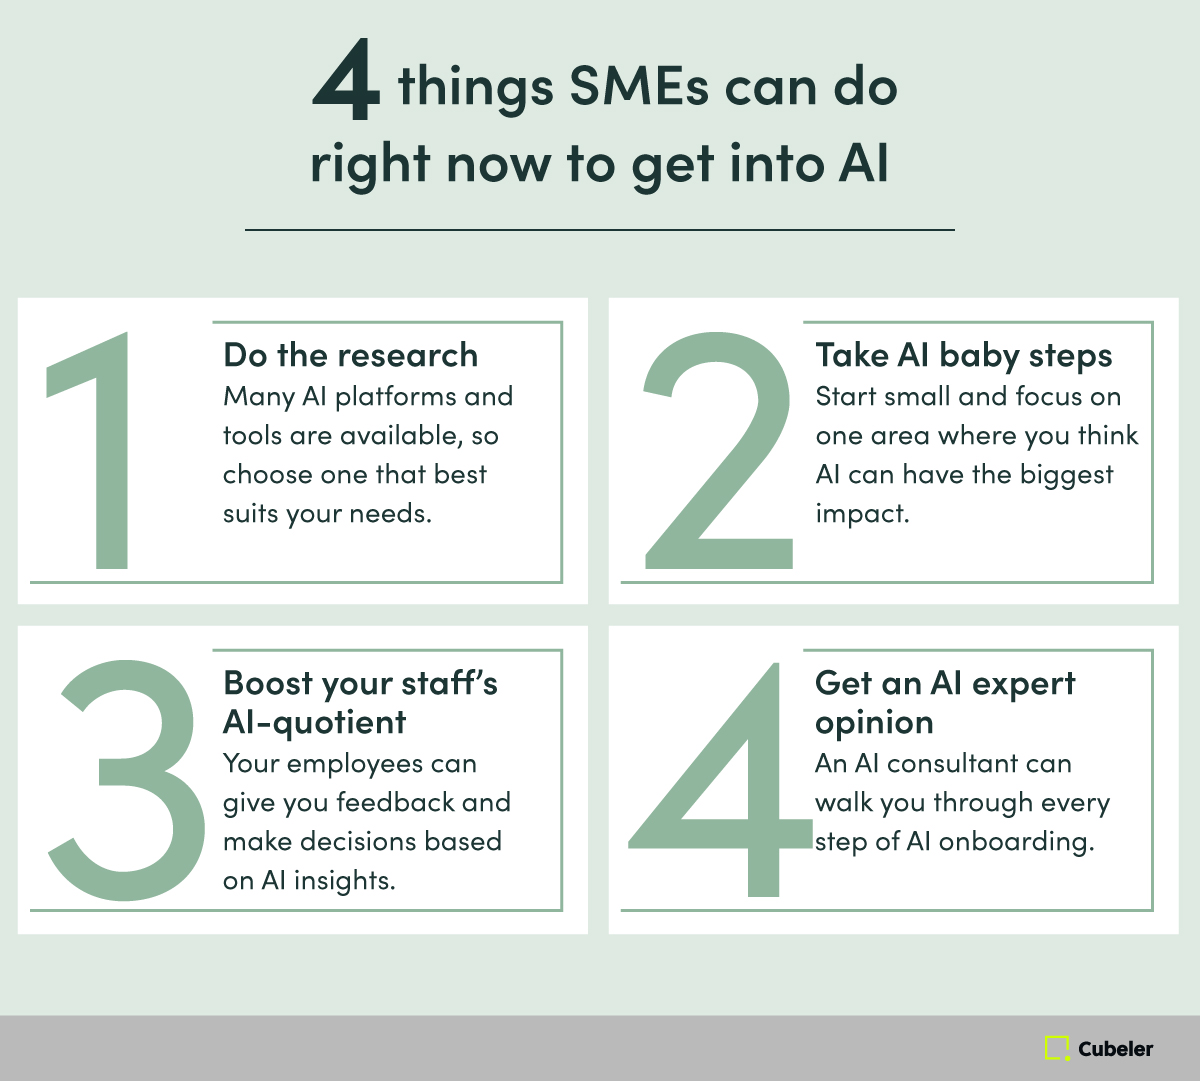 Four things SMEs can do right now to get into AI